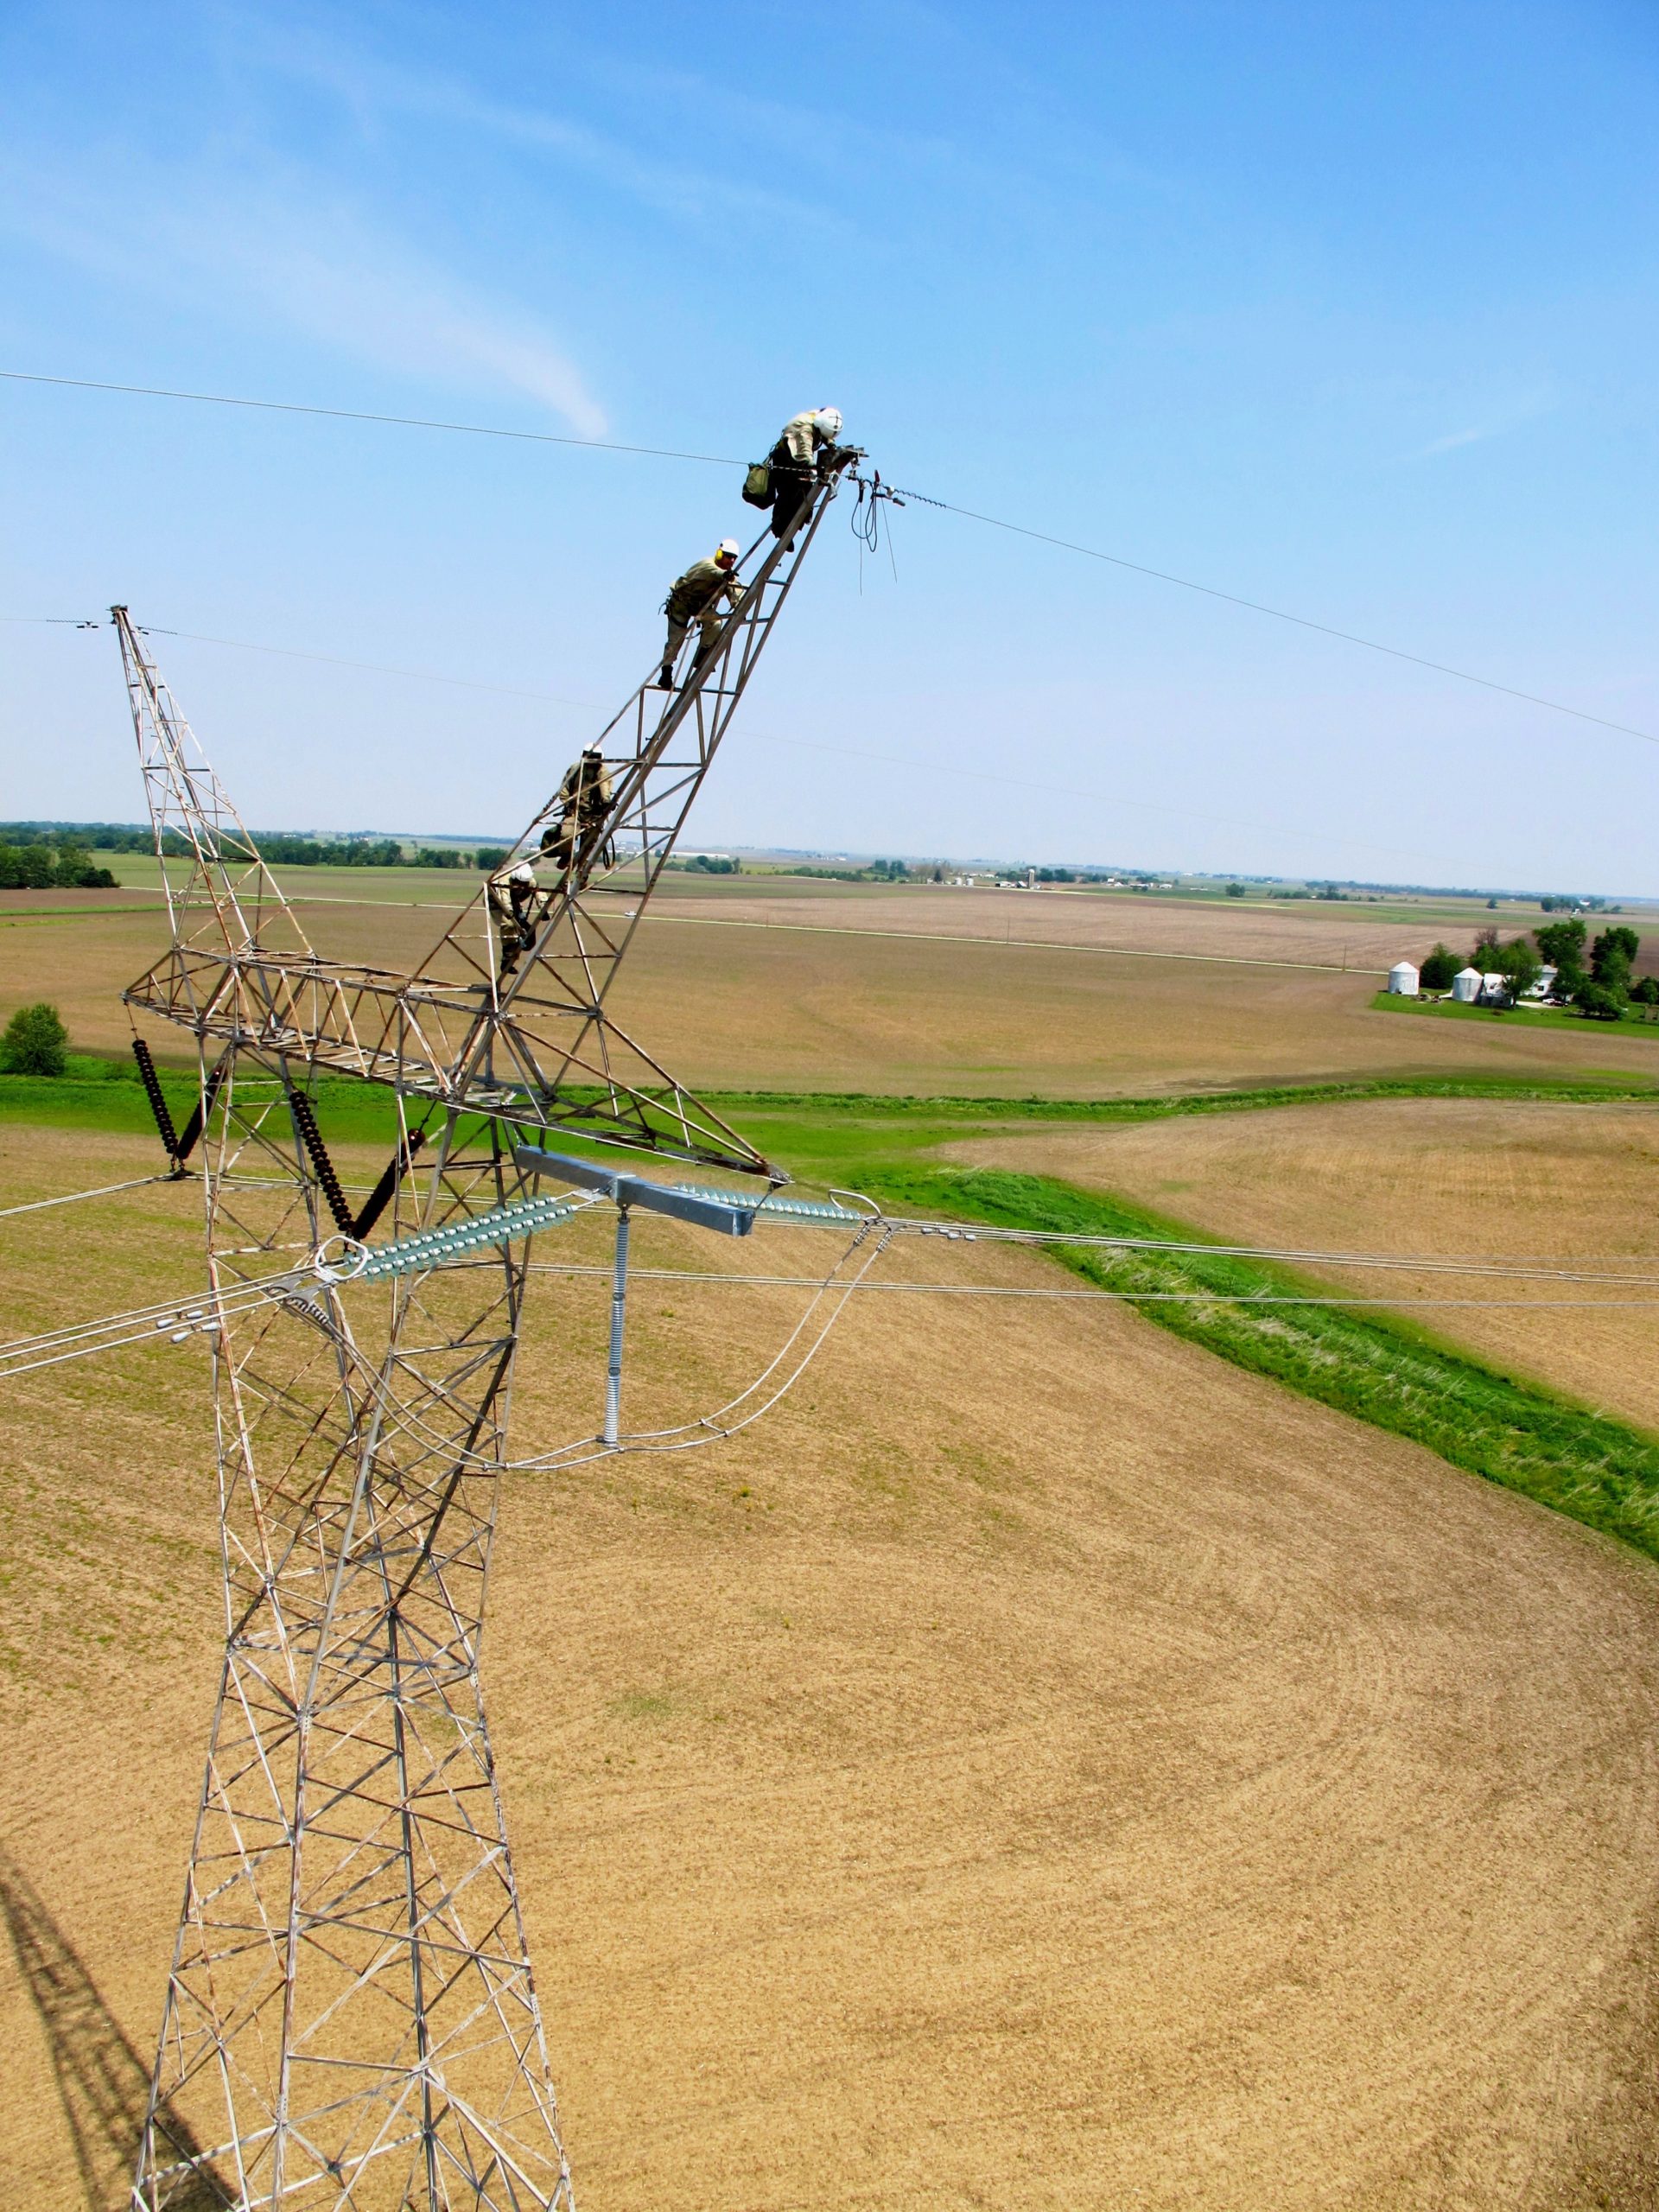 A group of individuals works on electrical lines in a rural setting.